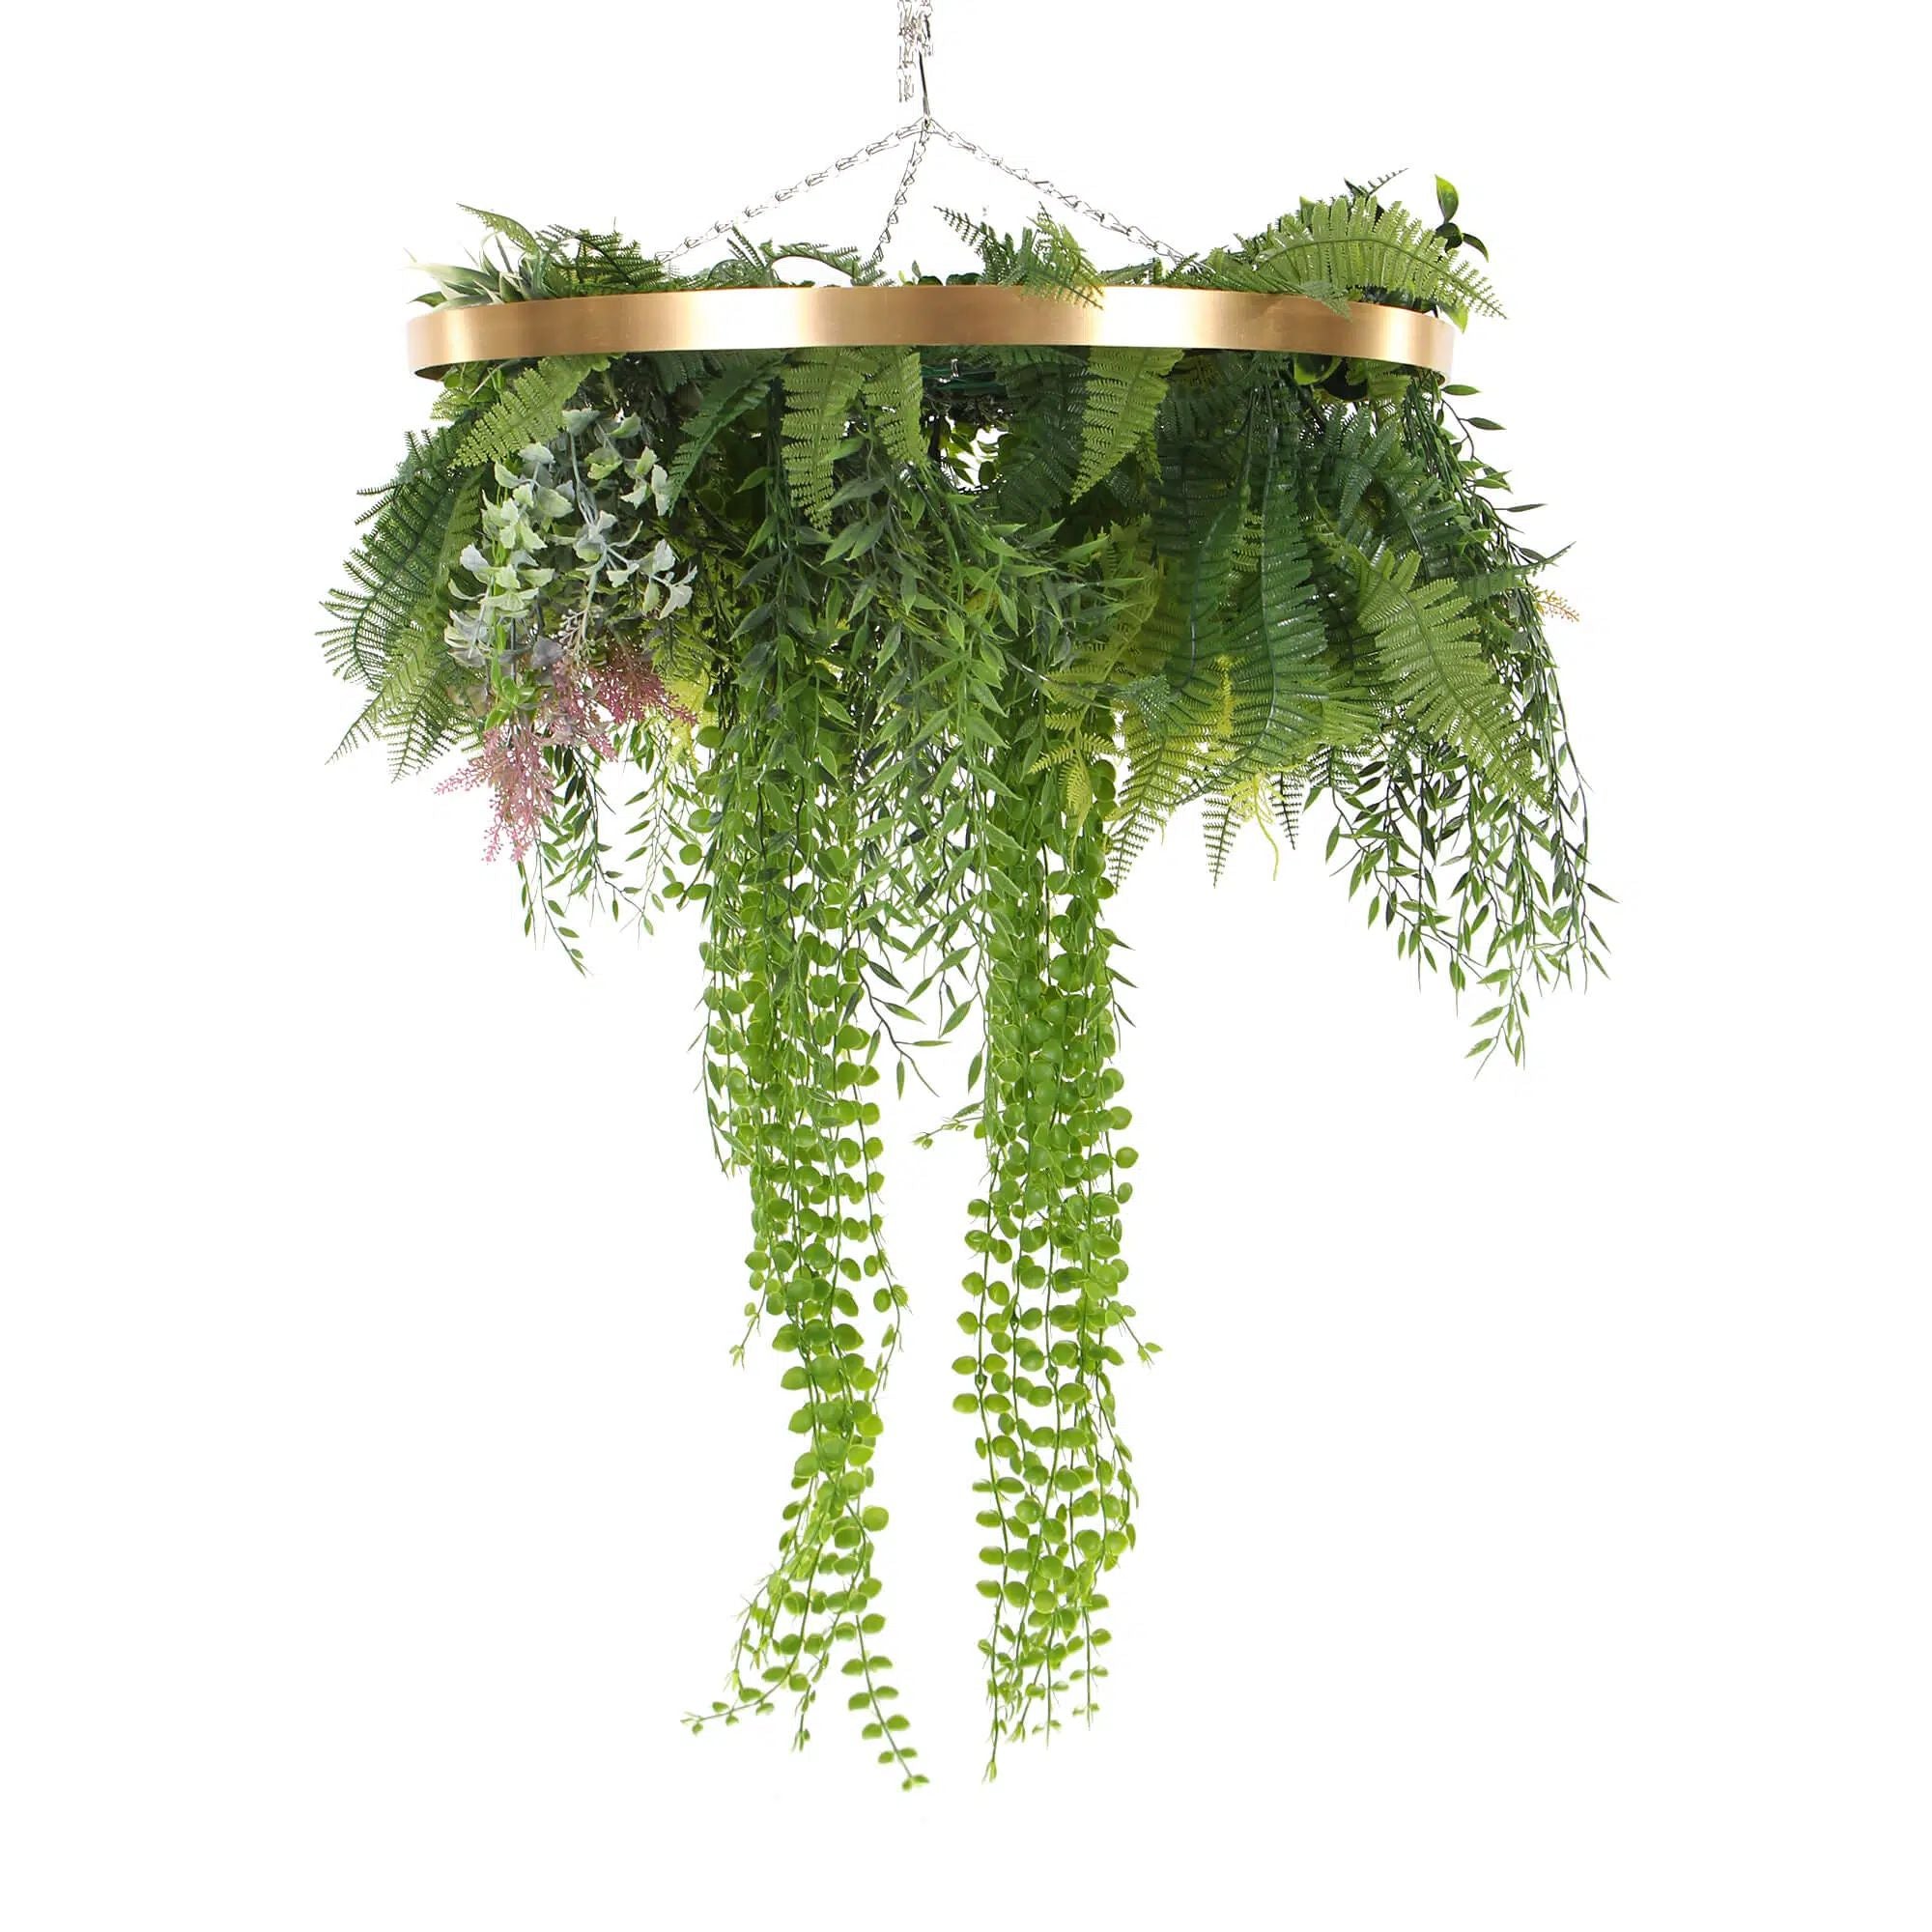 Imitation Gold Artificial Hanging Green Wall Disc 60cm (Limited Edition)